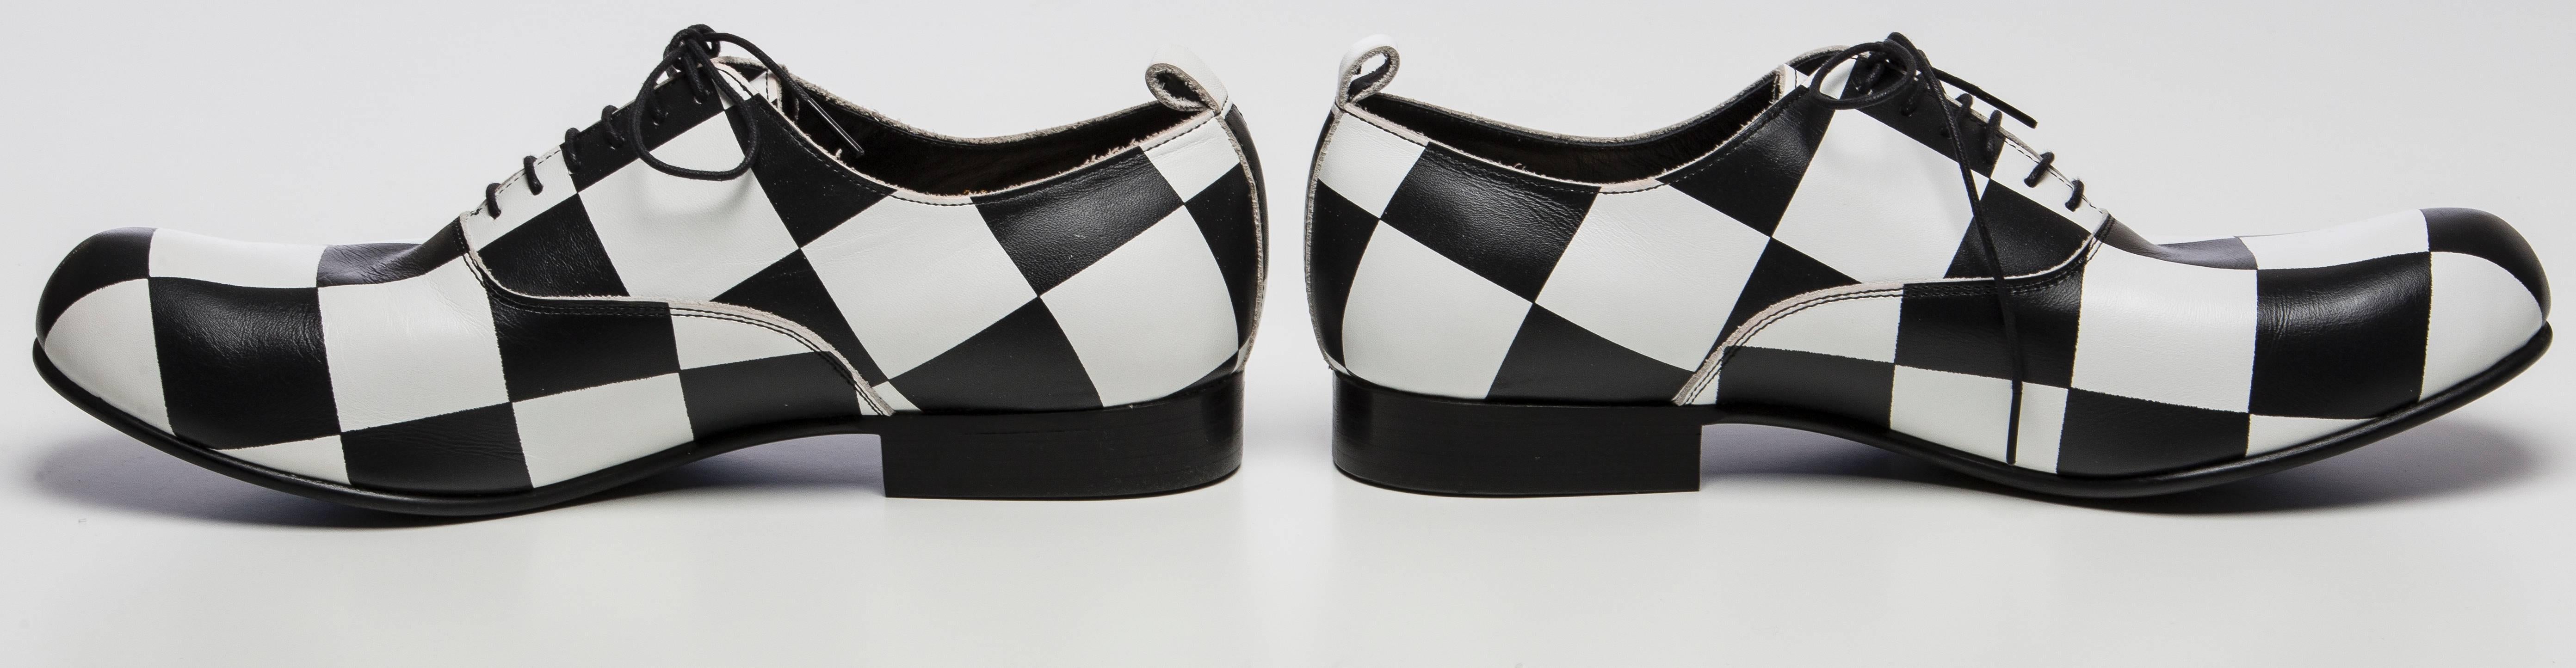  Comme des Garçons, Spring 2015 black & white checkered leather round-toe oxfords with rubber soles and lace tie closure at tops. Made in Japan. Includes dust bag.

Japan 28
US 10.5